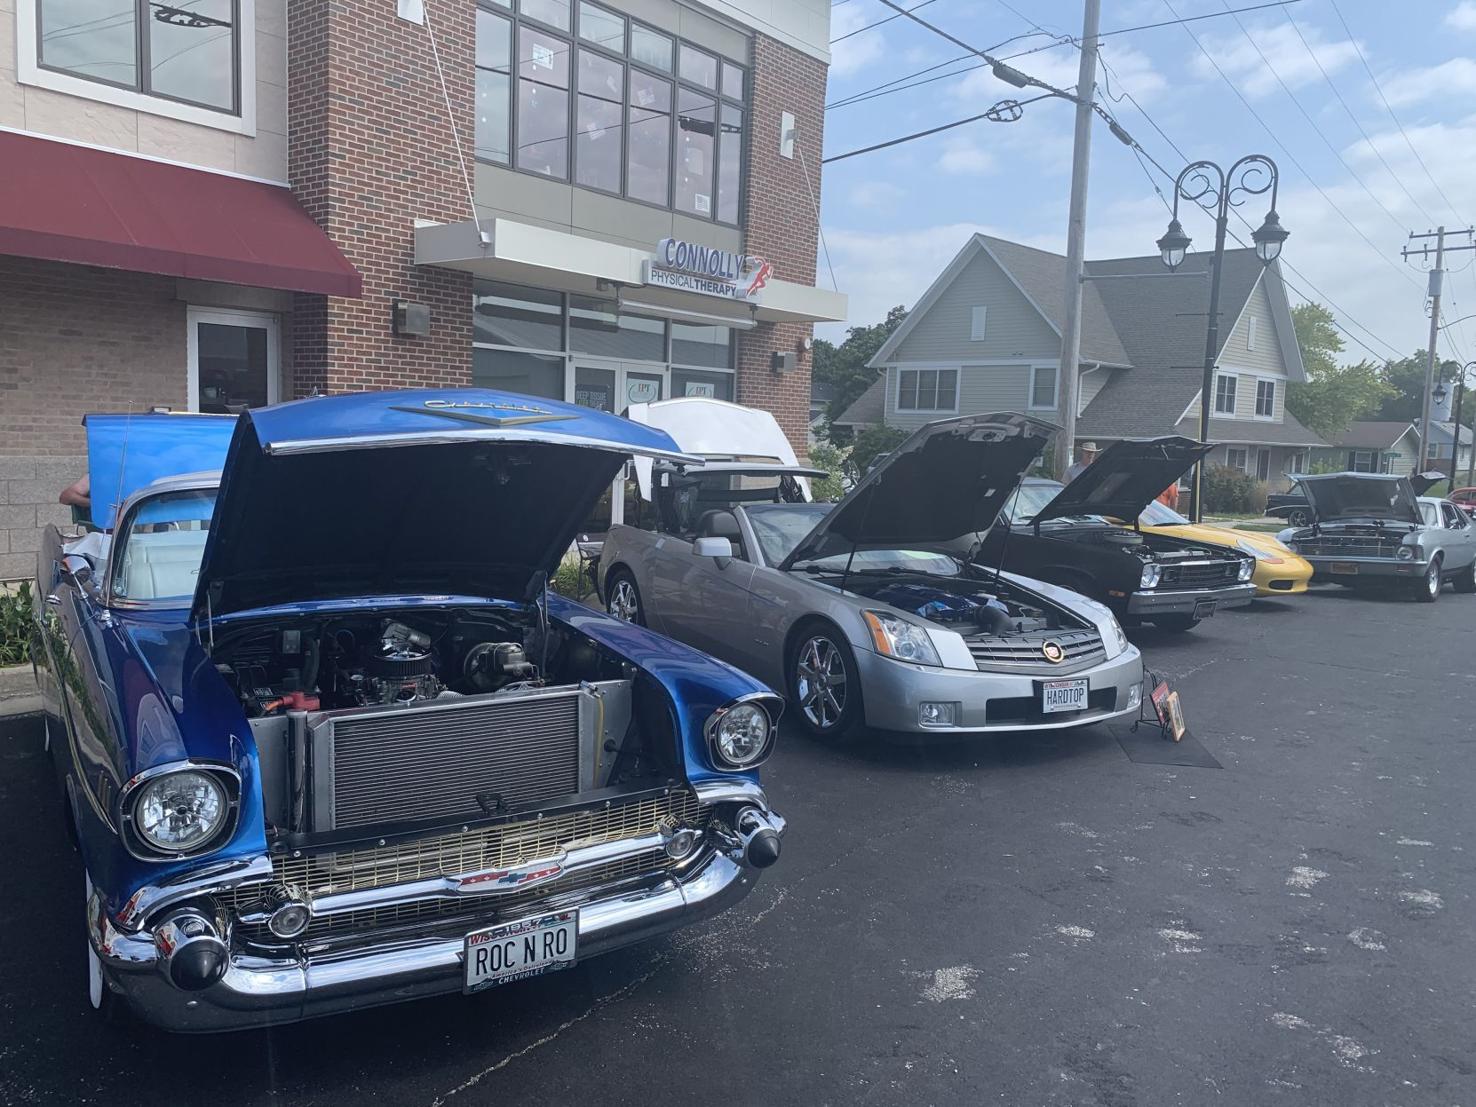 14th Annual Union Grove Car Show to be held Saturday